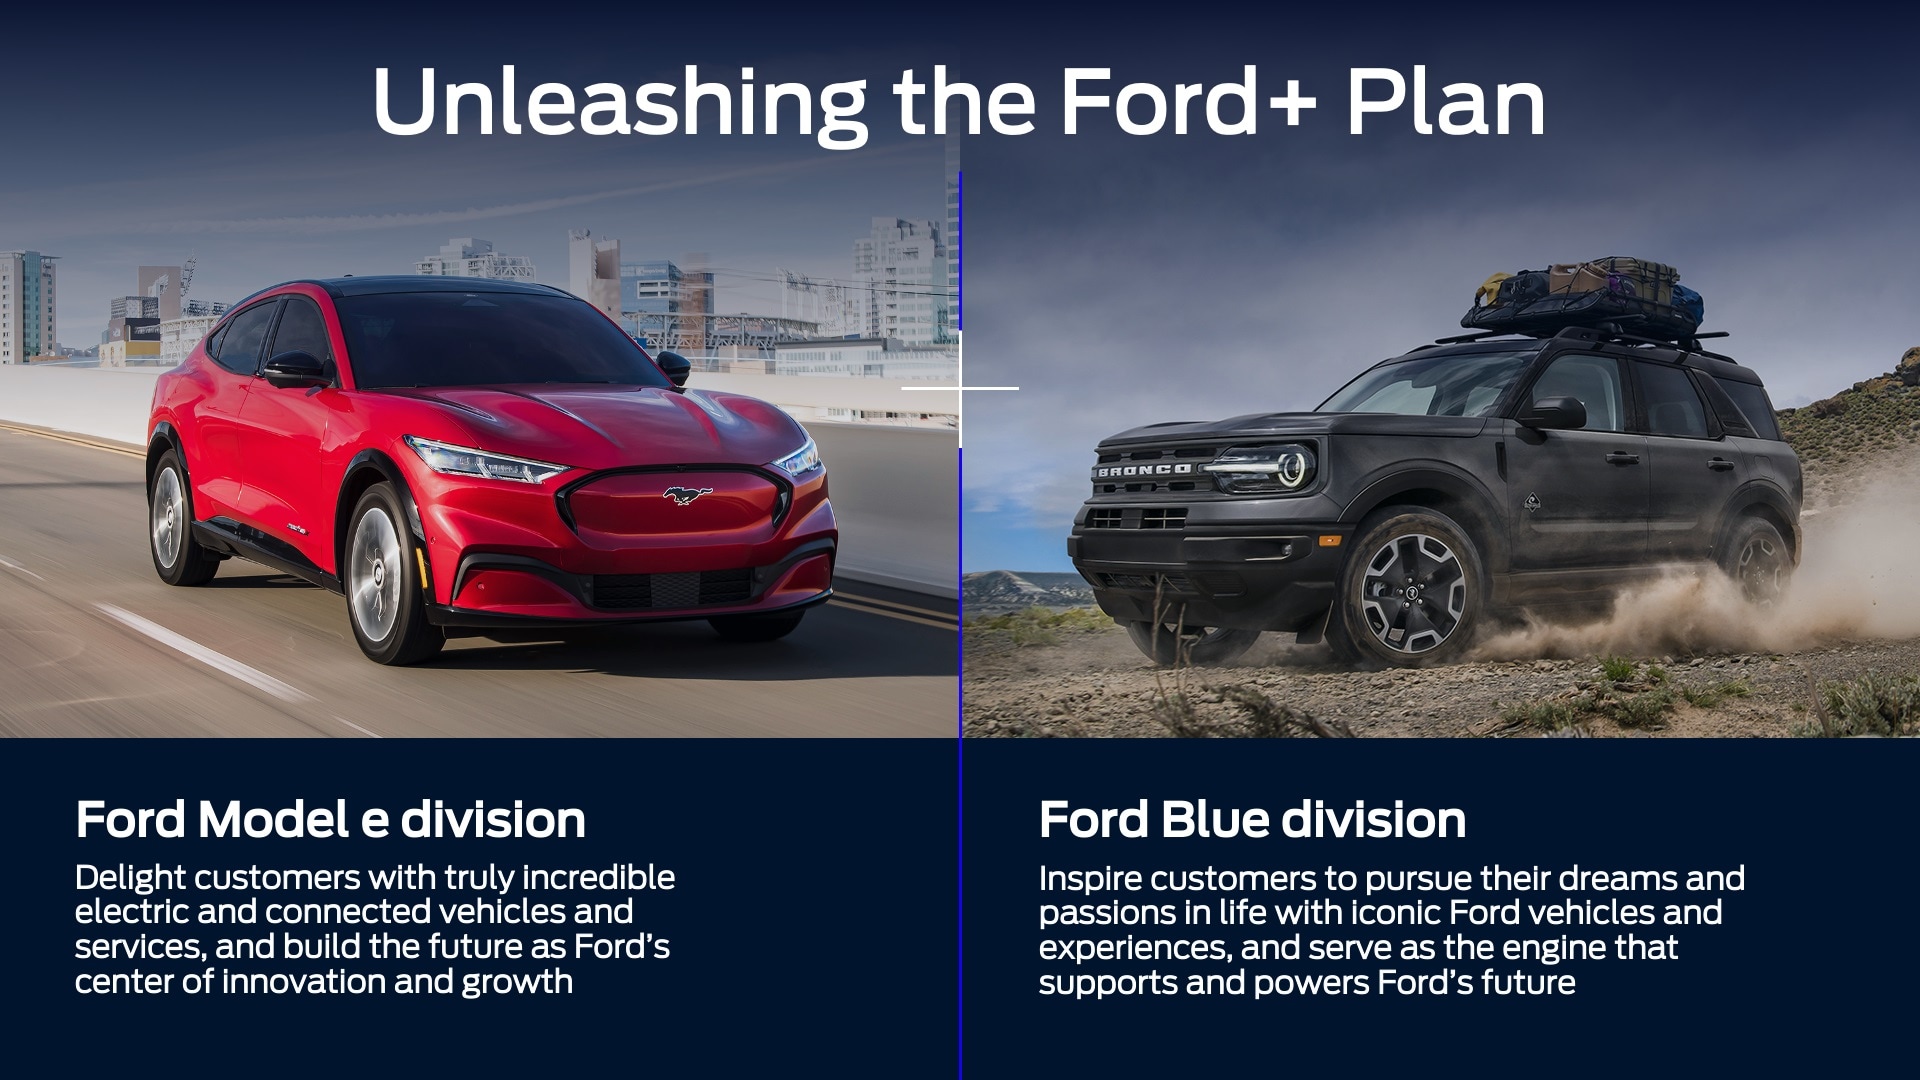 Ford Accelerating Transformation Forming Distinct Auto Units to Scale